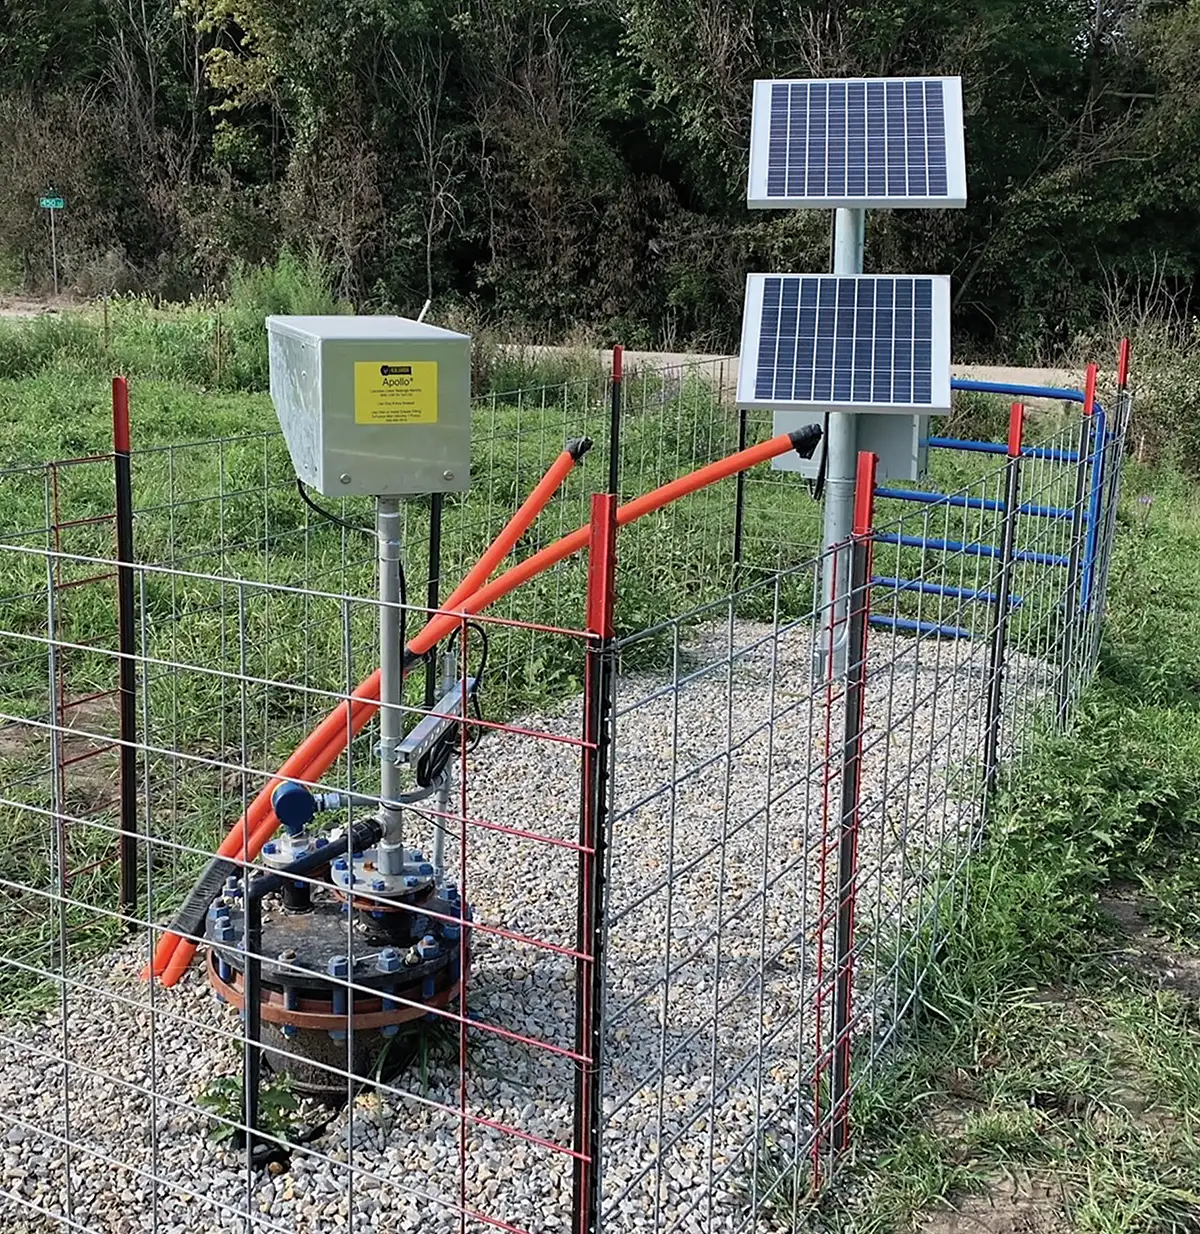 A fenced-off water well with orange pipes connected to a control box and blue pumps, including a top-head drive pump. Positioned nearby are two solar panels mounted on metal poles. The setup is situated outdoors, surrounded by grass and trees. Gravel surrounds the well base, with another fence in the background.